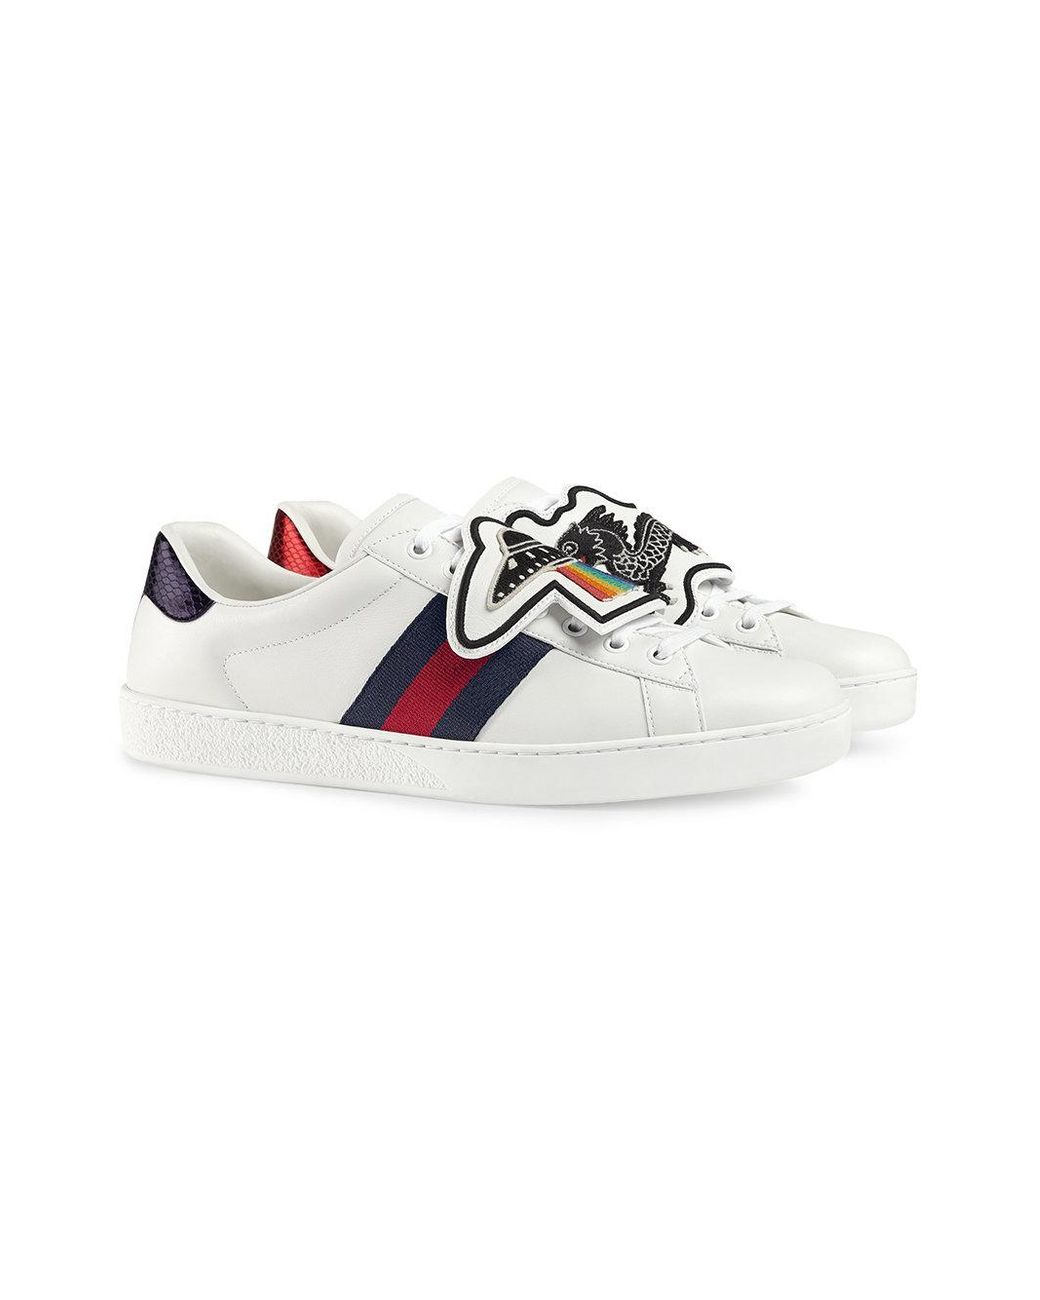 Gucci Ace Sneakers With Removable Patches in White for Men | Lyst